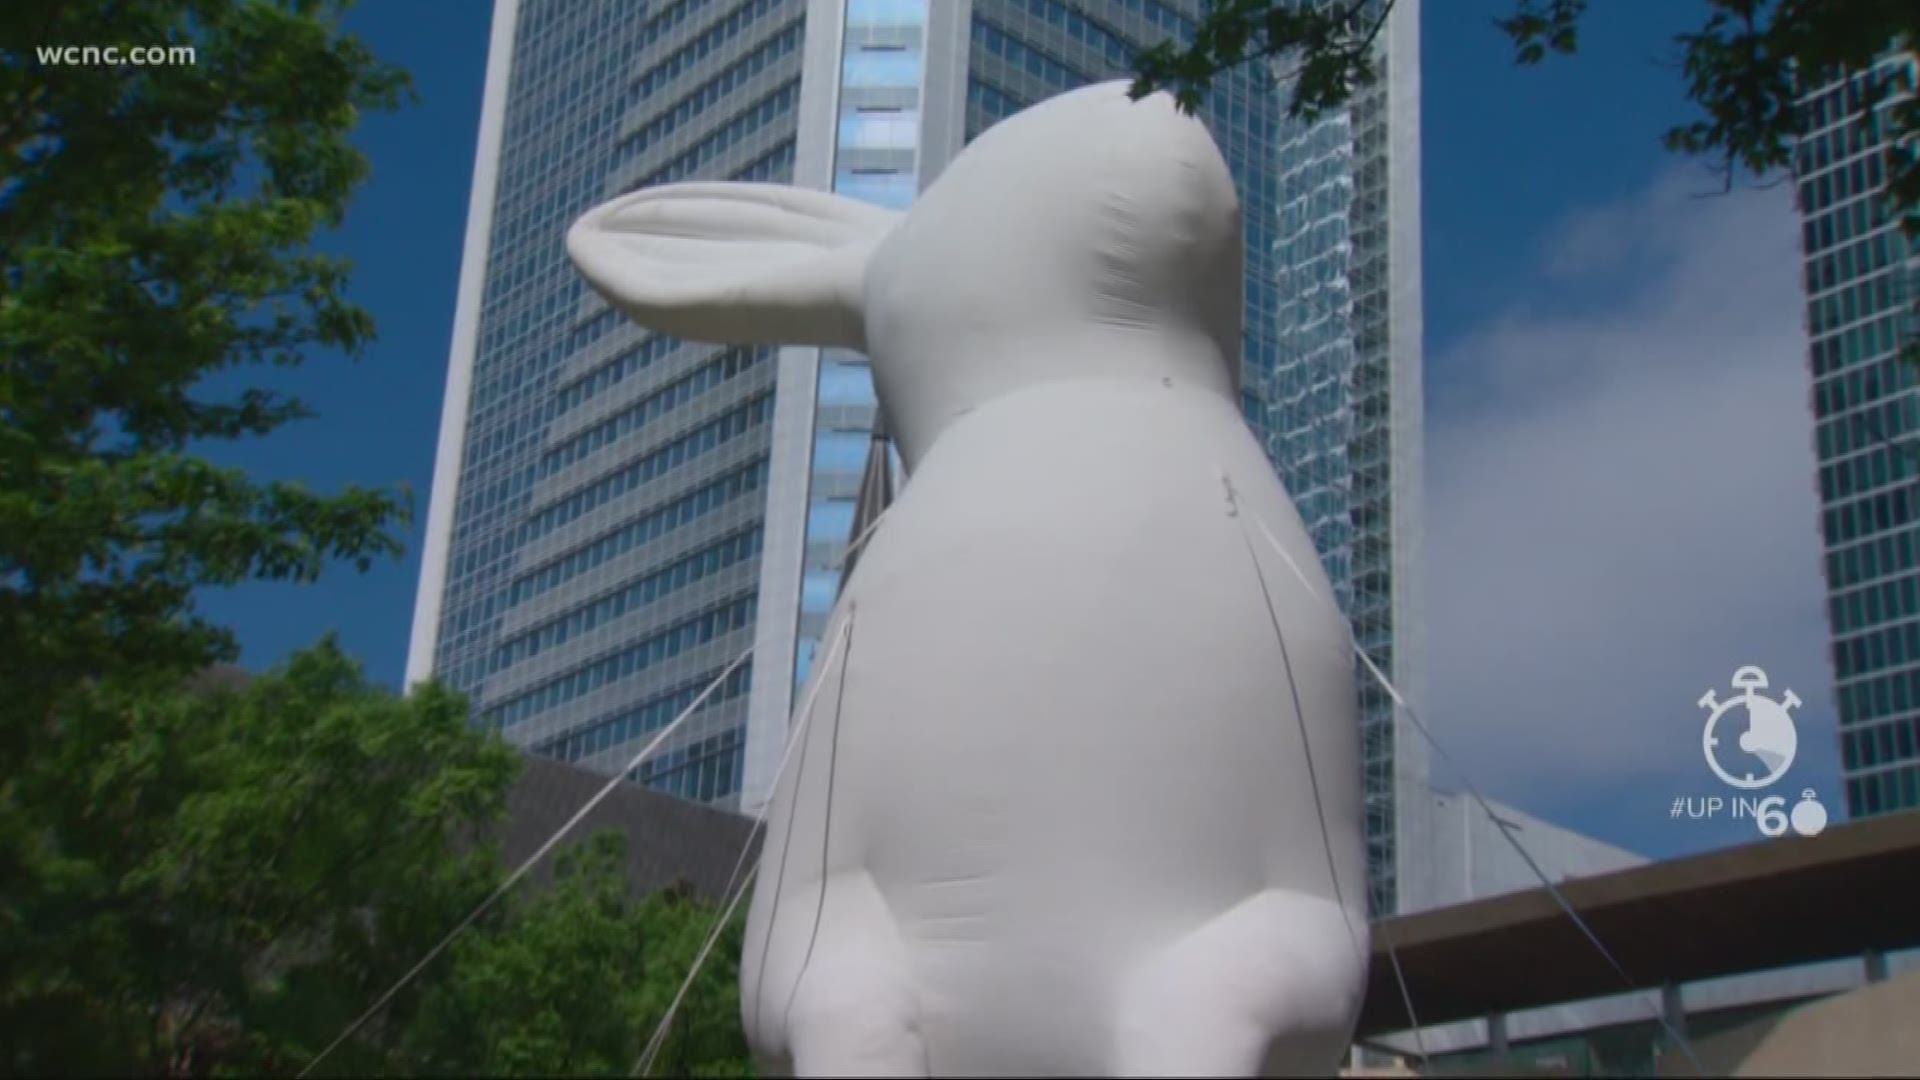 If you've got a little extra hop in your step while walking through uptown, there's probably a good reason. Inspired by the true invasion of bunnies in AUstralia, larger-than-life blowup bunnies are taking over the Queen City.